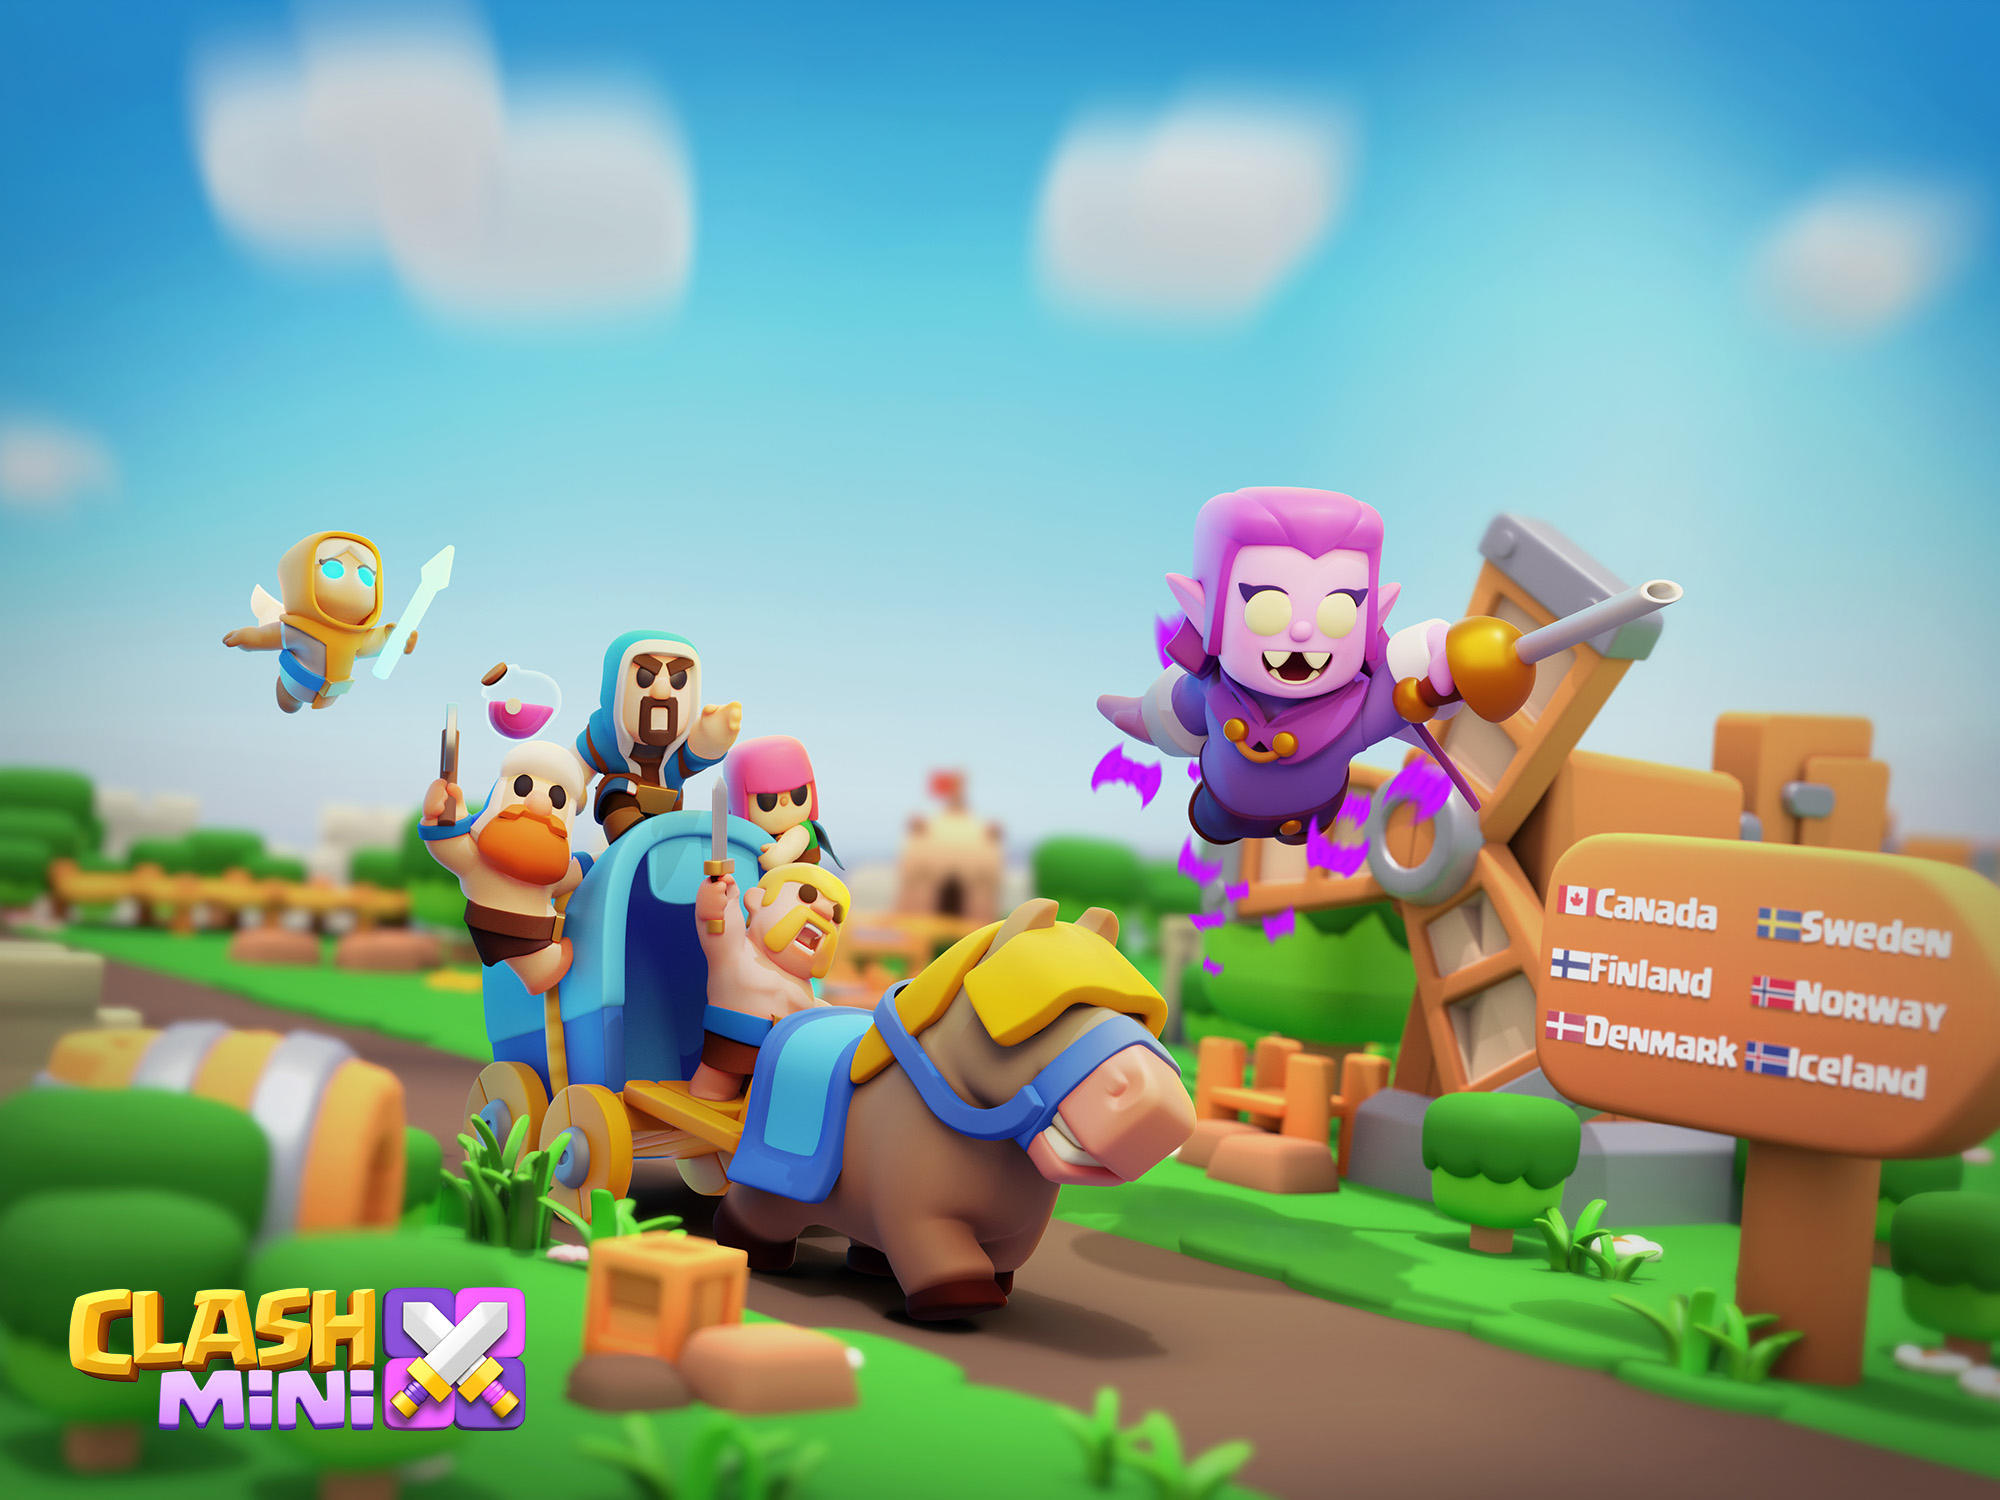 Chess Hero Skins  What do you think? : r/ClashOfClans